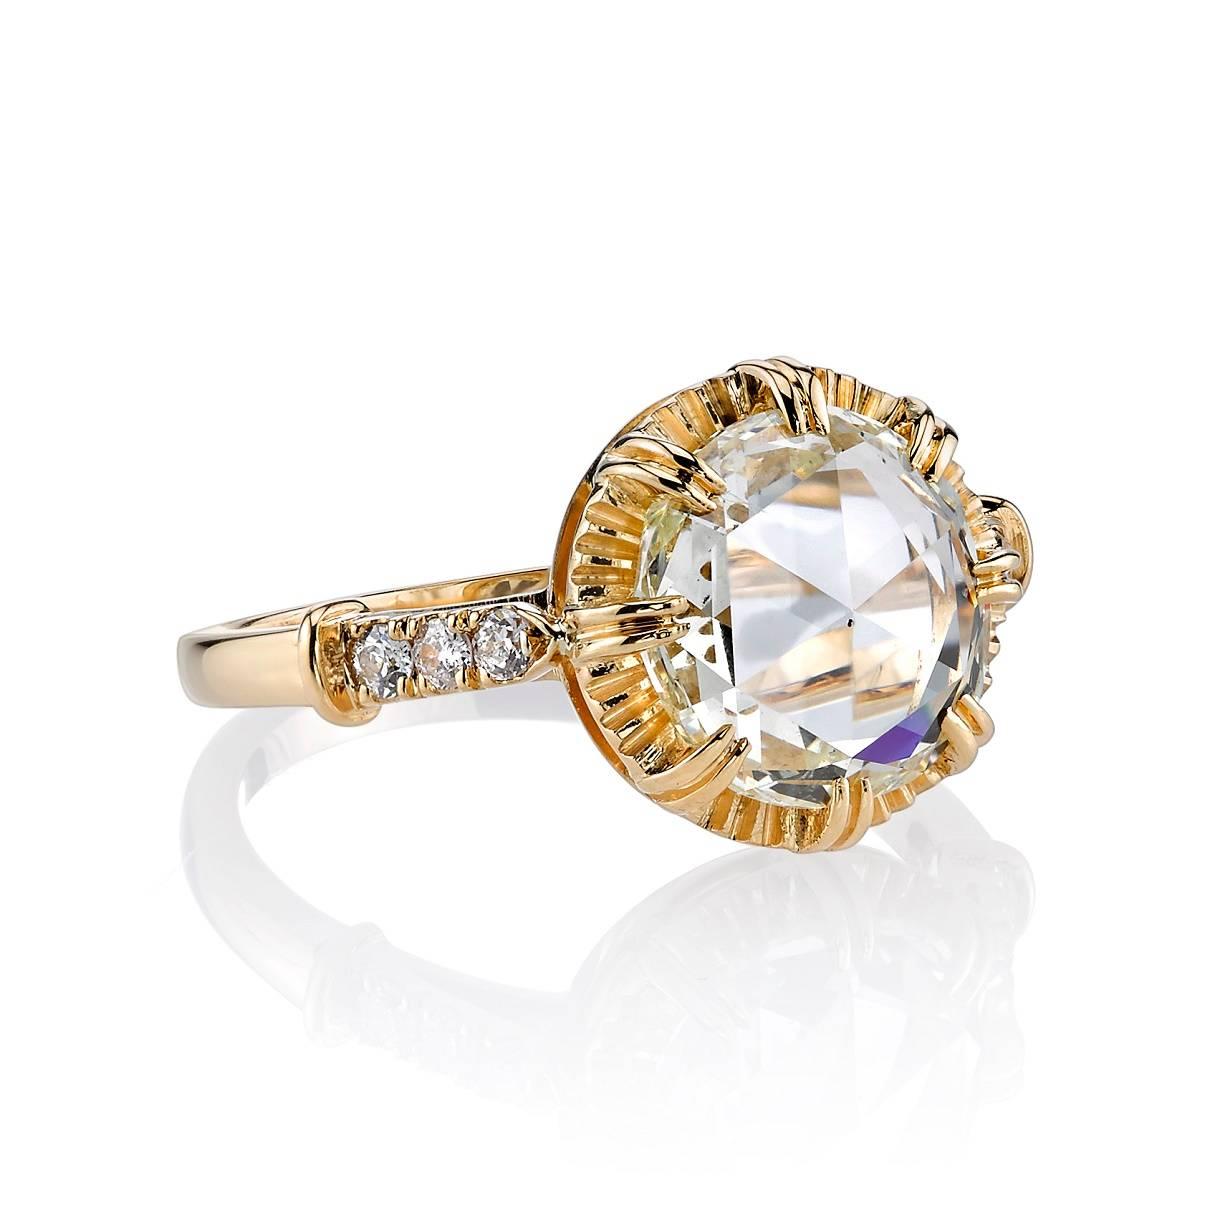 2.45ct K/SI1 EGL certified Rose cut diamond set in a handcrafted 18K yellow gold mounting. A sweet solitaire design featuring a unique illusion and low profile.